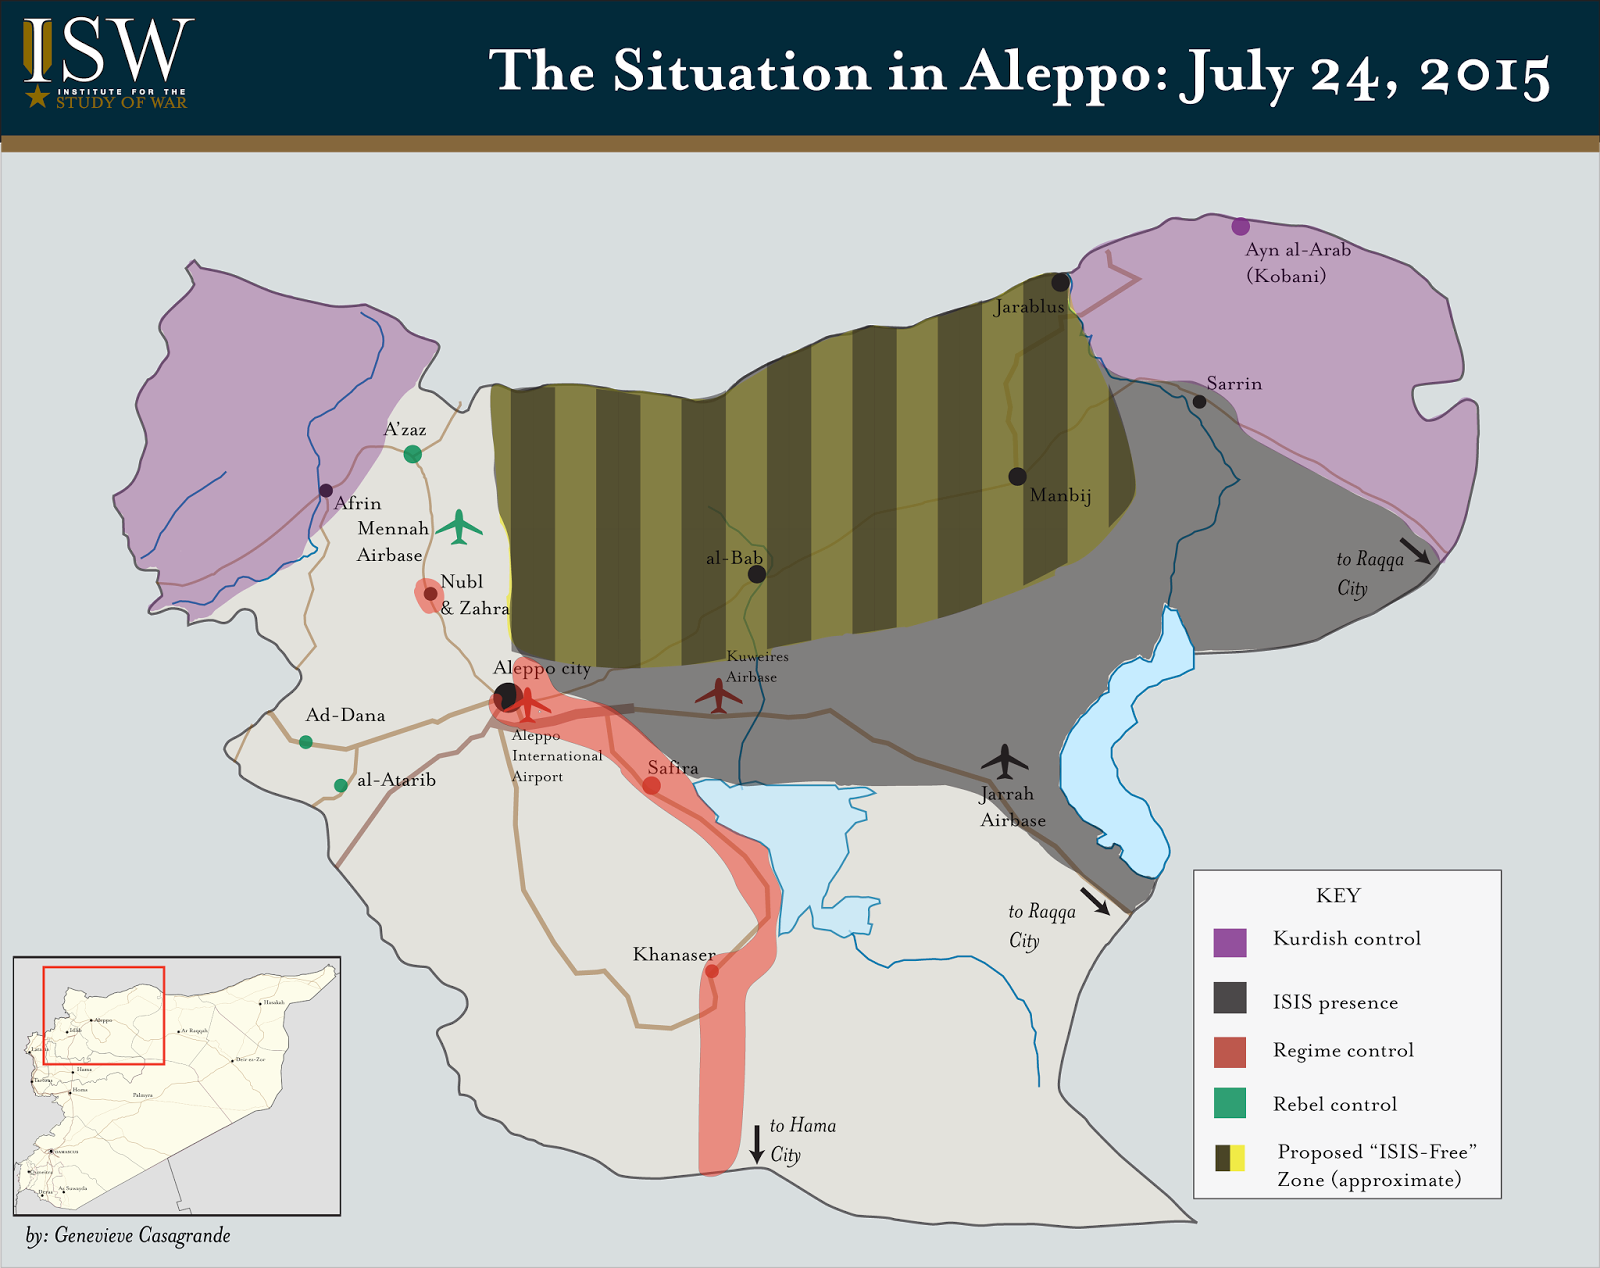 The Situation in Aleppo: June 24, 2015 | Institute for the Study of War